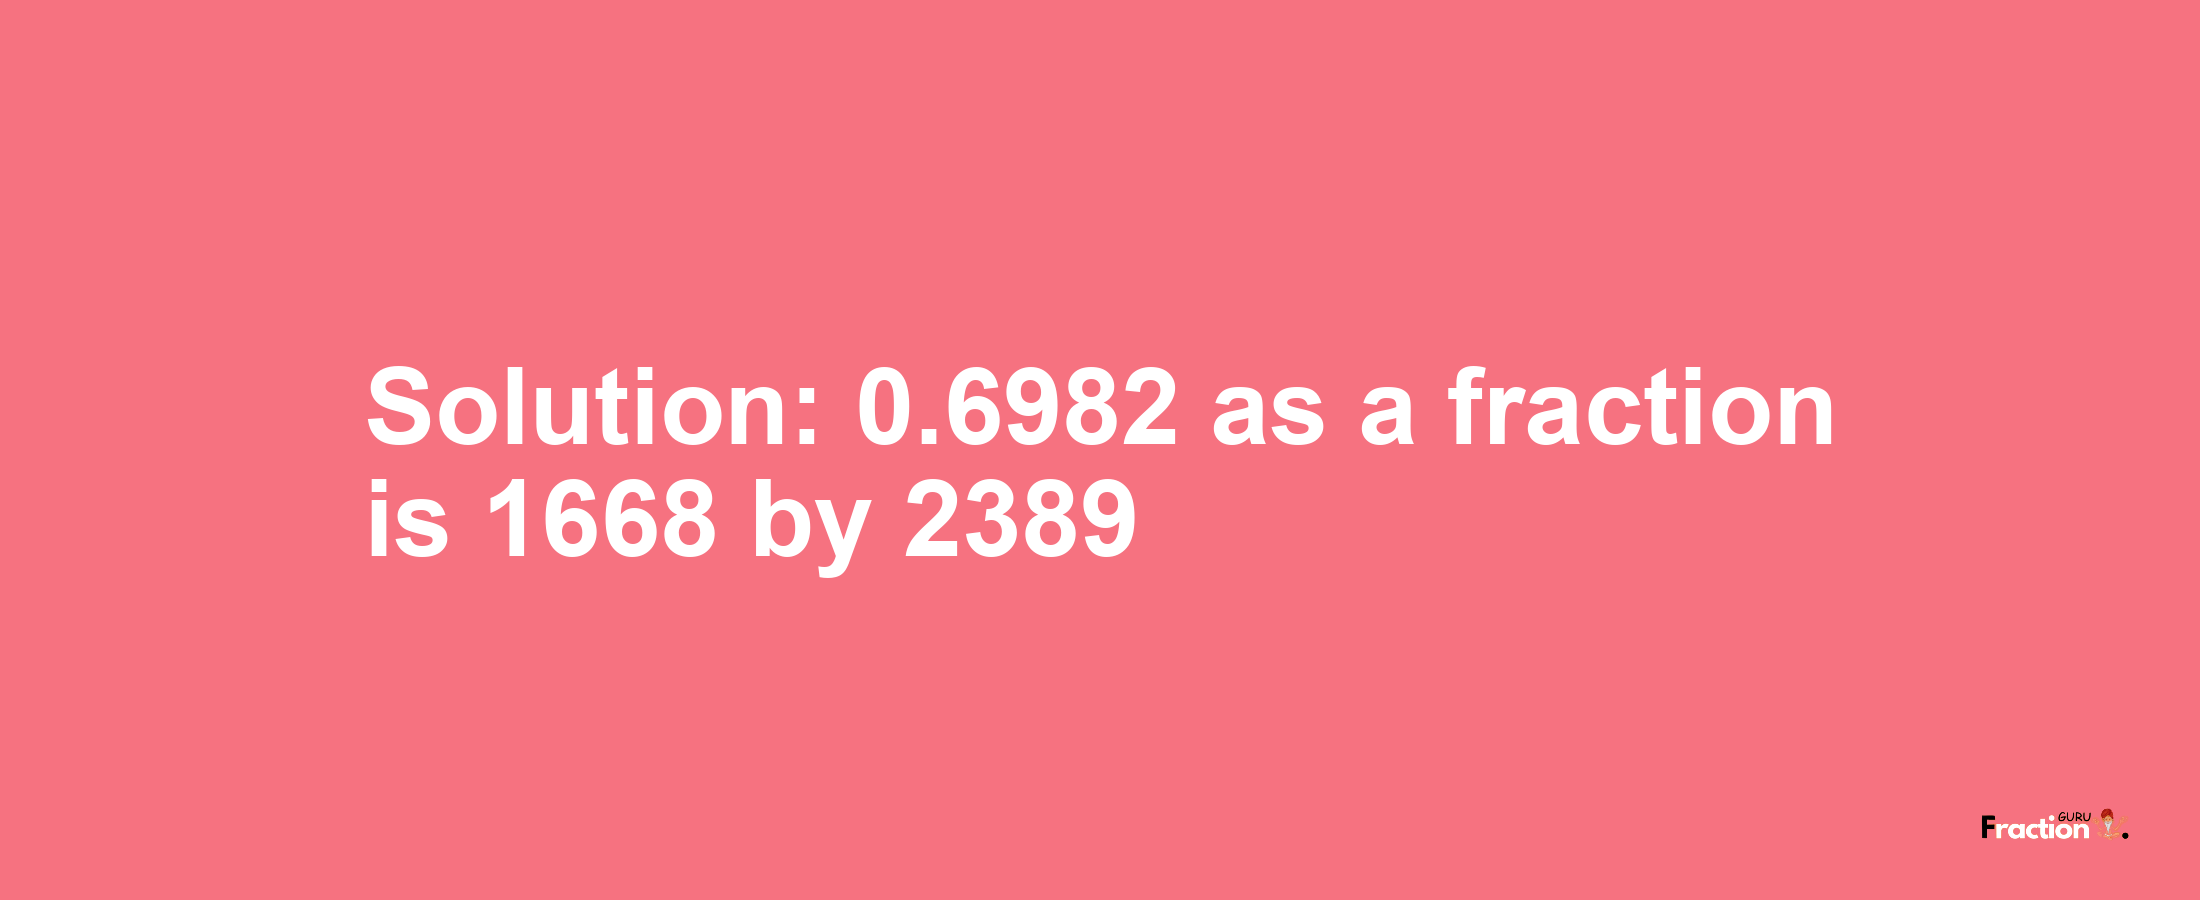 Solution:0.6982 as a fraction is 1668/2389